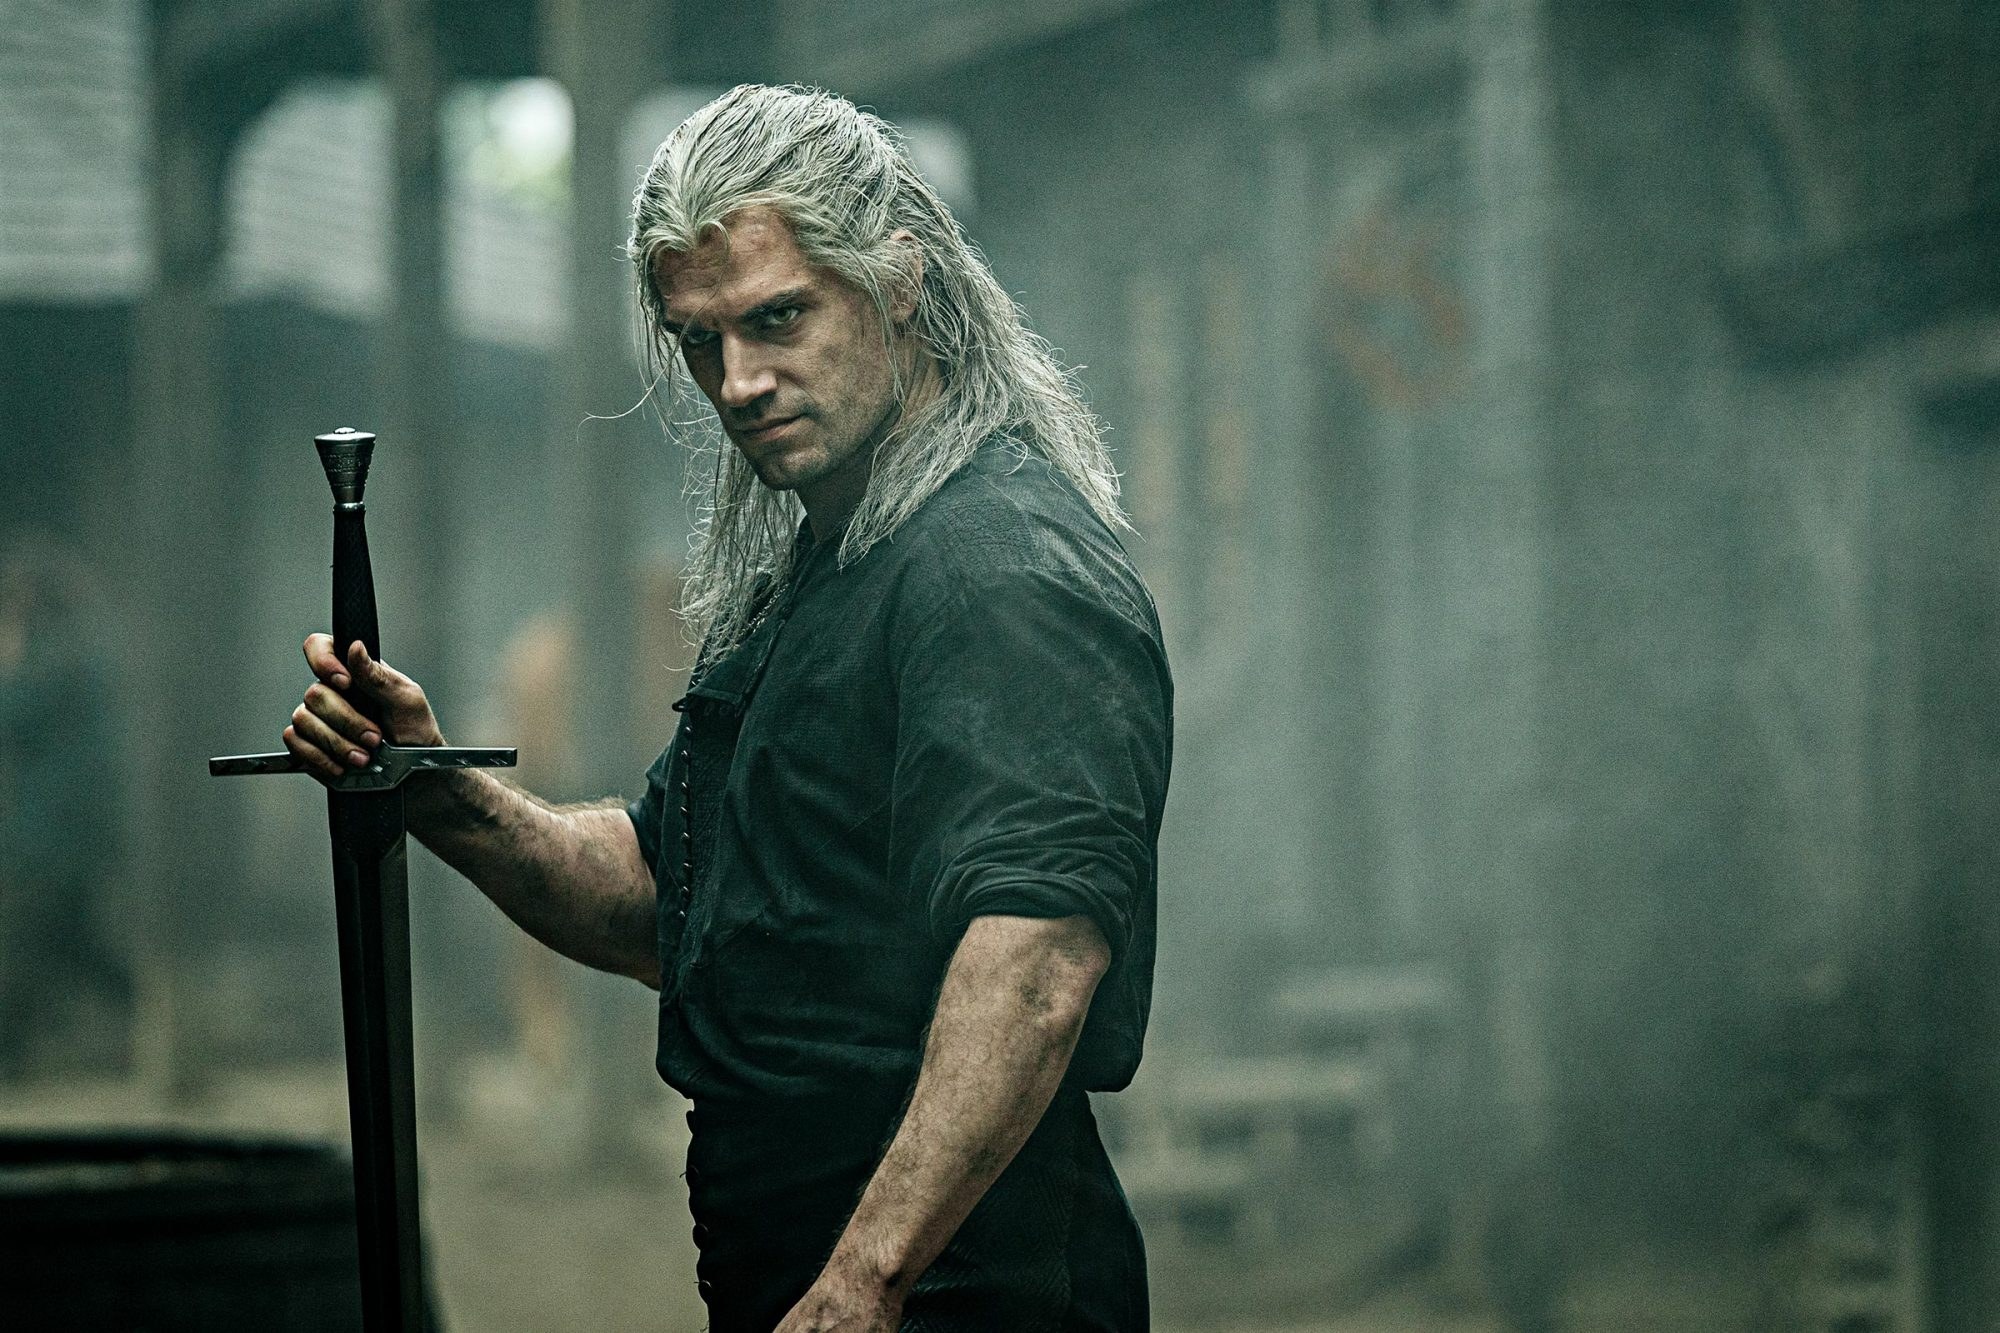 Henry Cavill will be leaving The Witcher after season 3, replaced by Liam Hemsworth